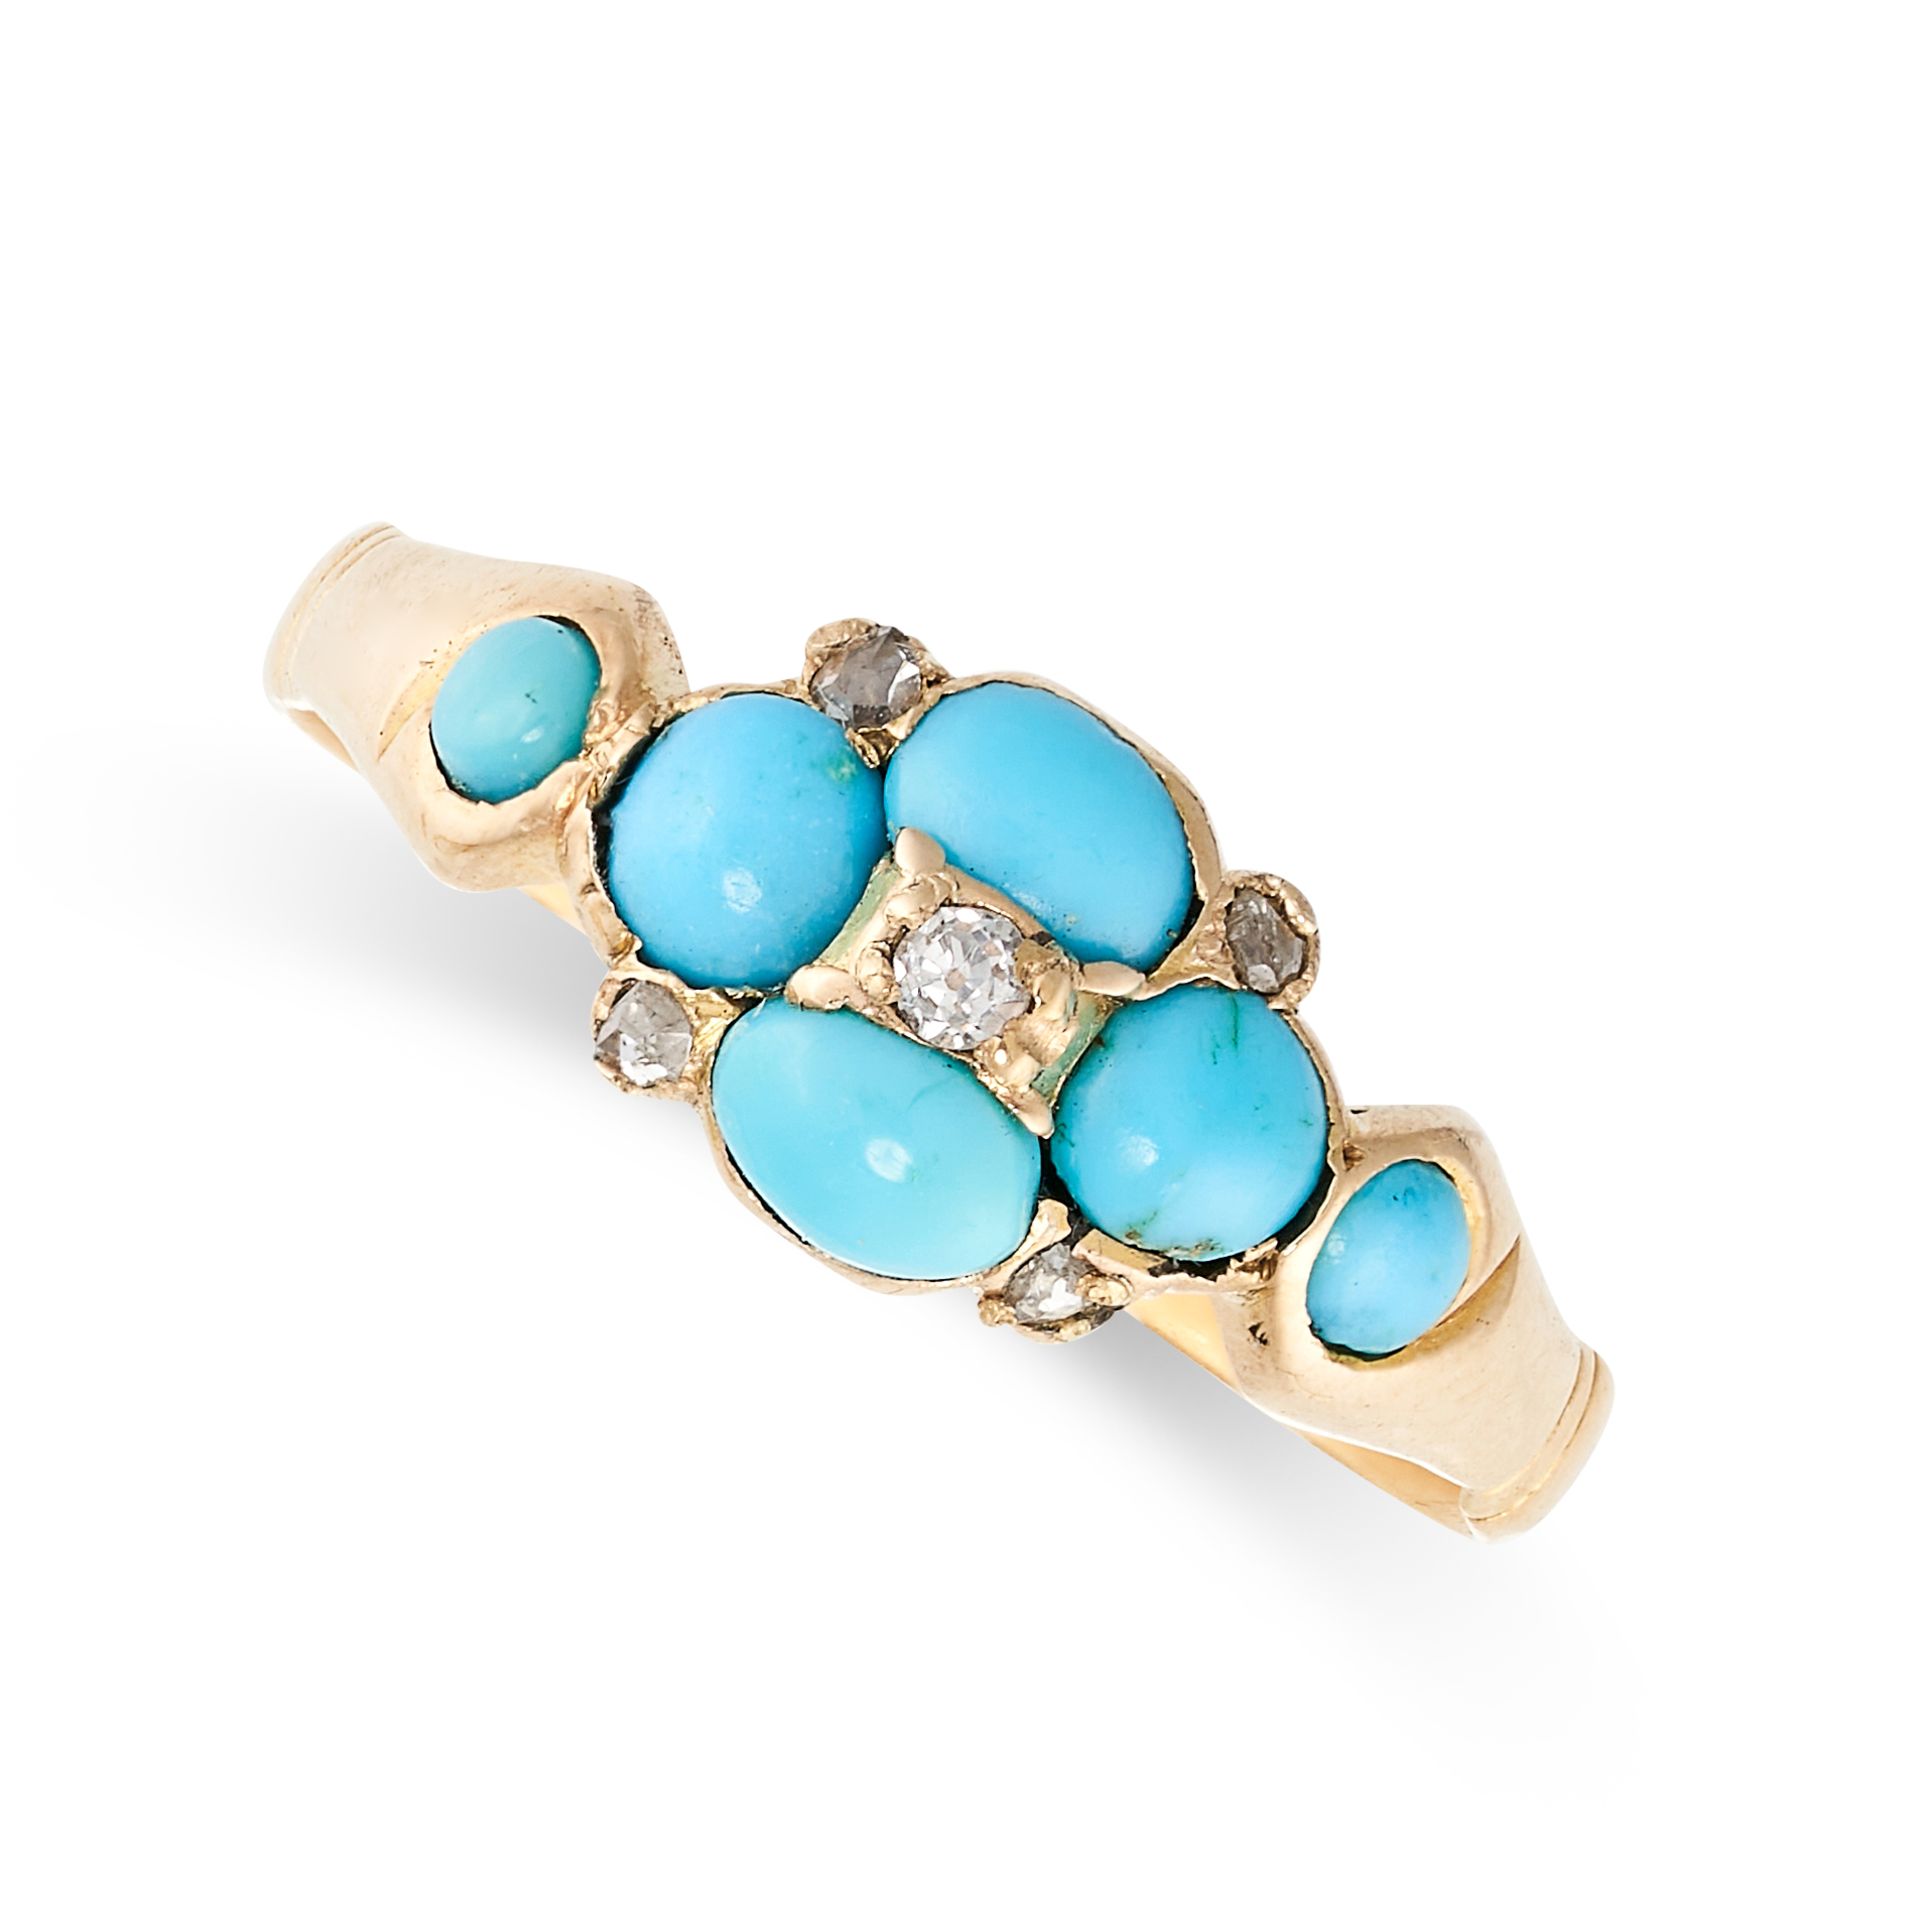 AN ANTIQUE VICTORIAN TURQUOISE AND DIAMOND RING, 1871 in 22ct yellow gold, set with cabochon